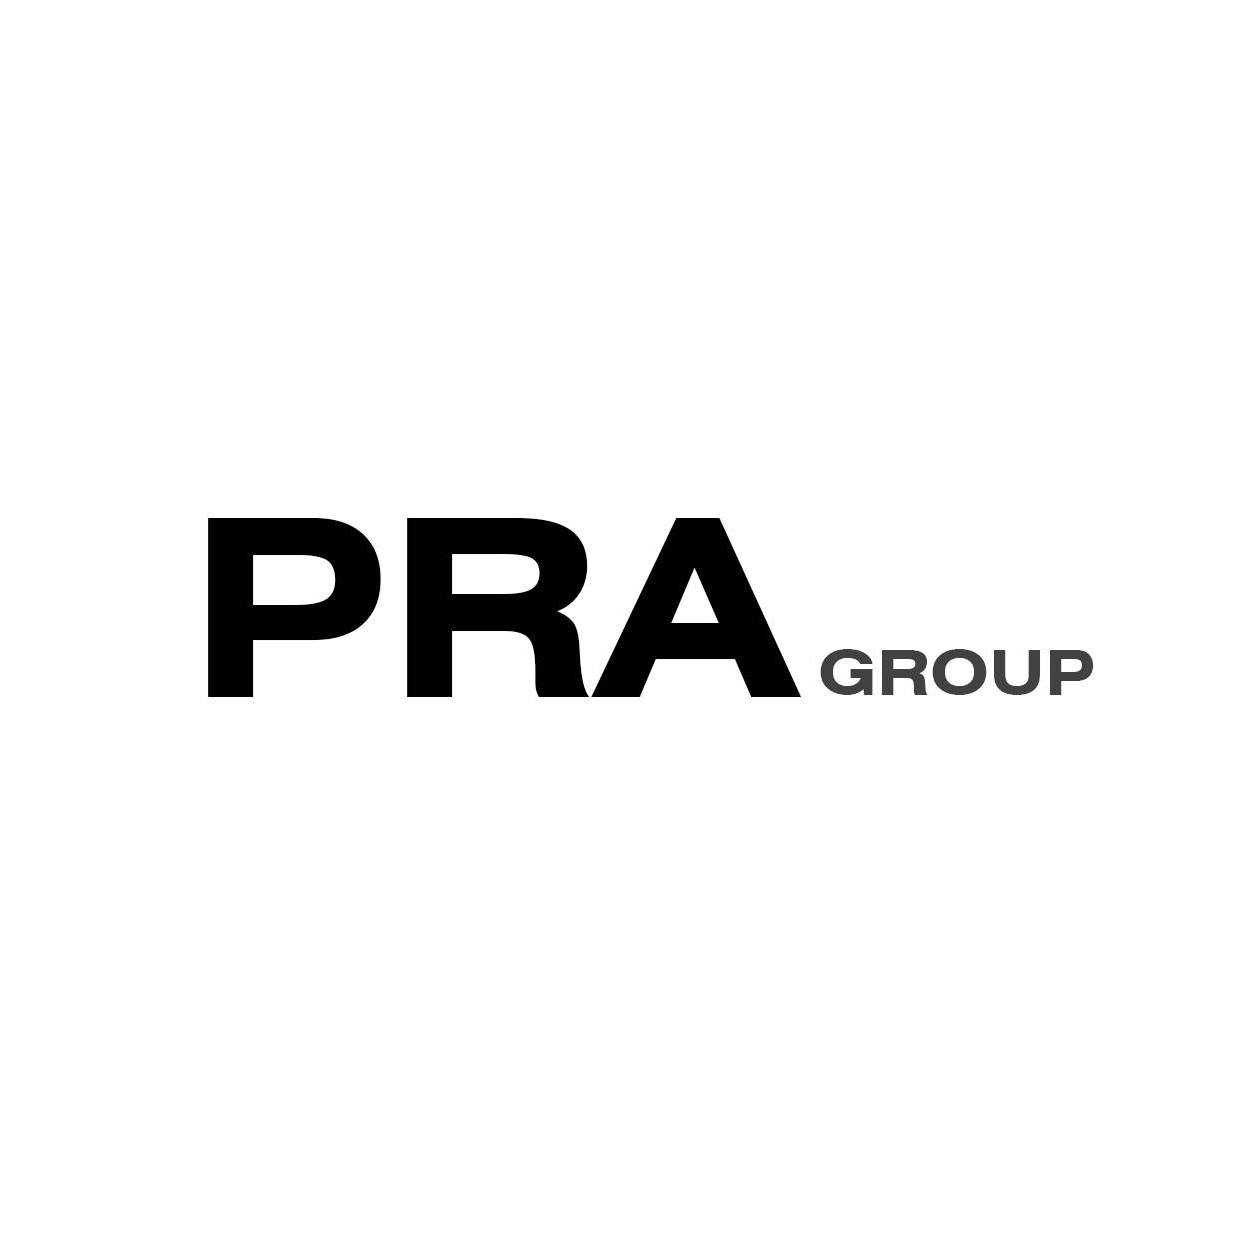 PRA GROUP|Accounting Services|Professional Services